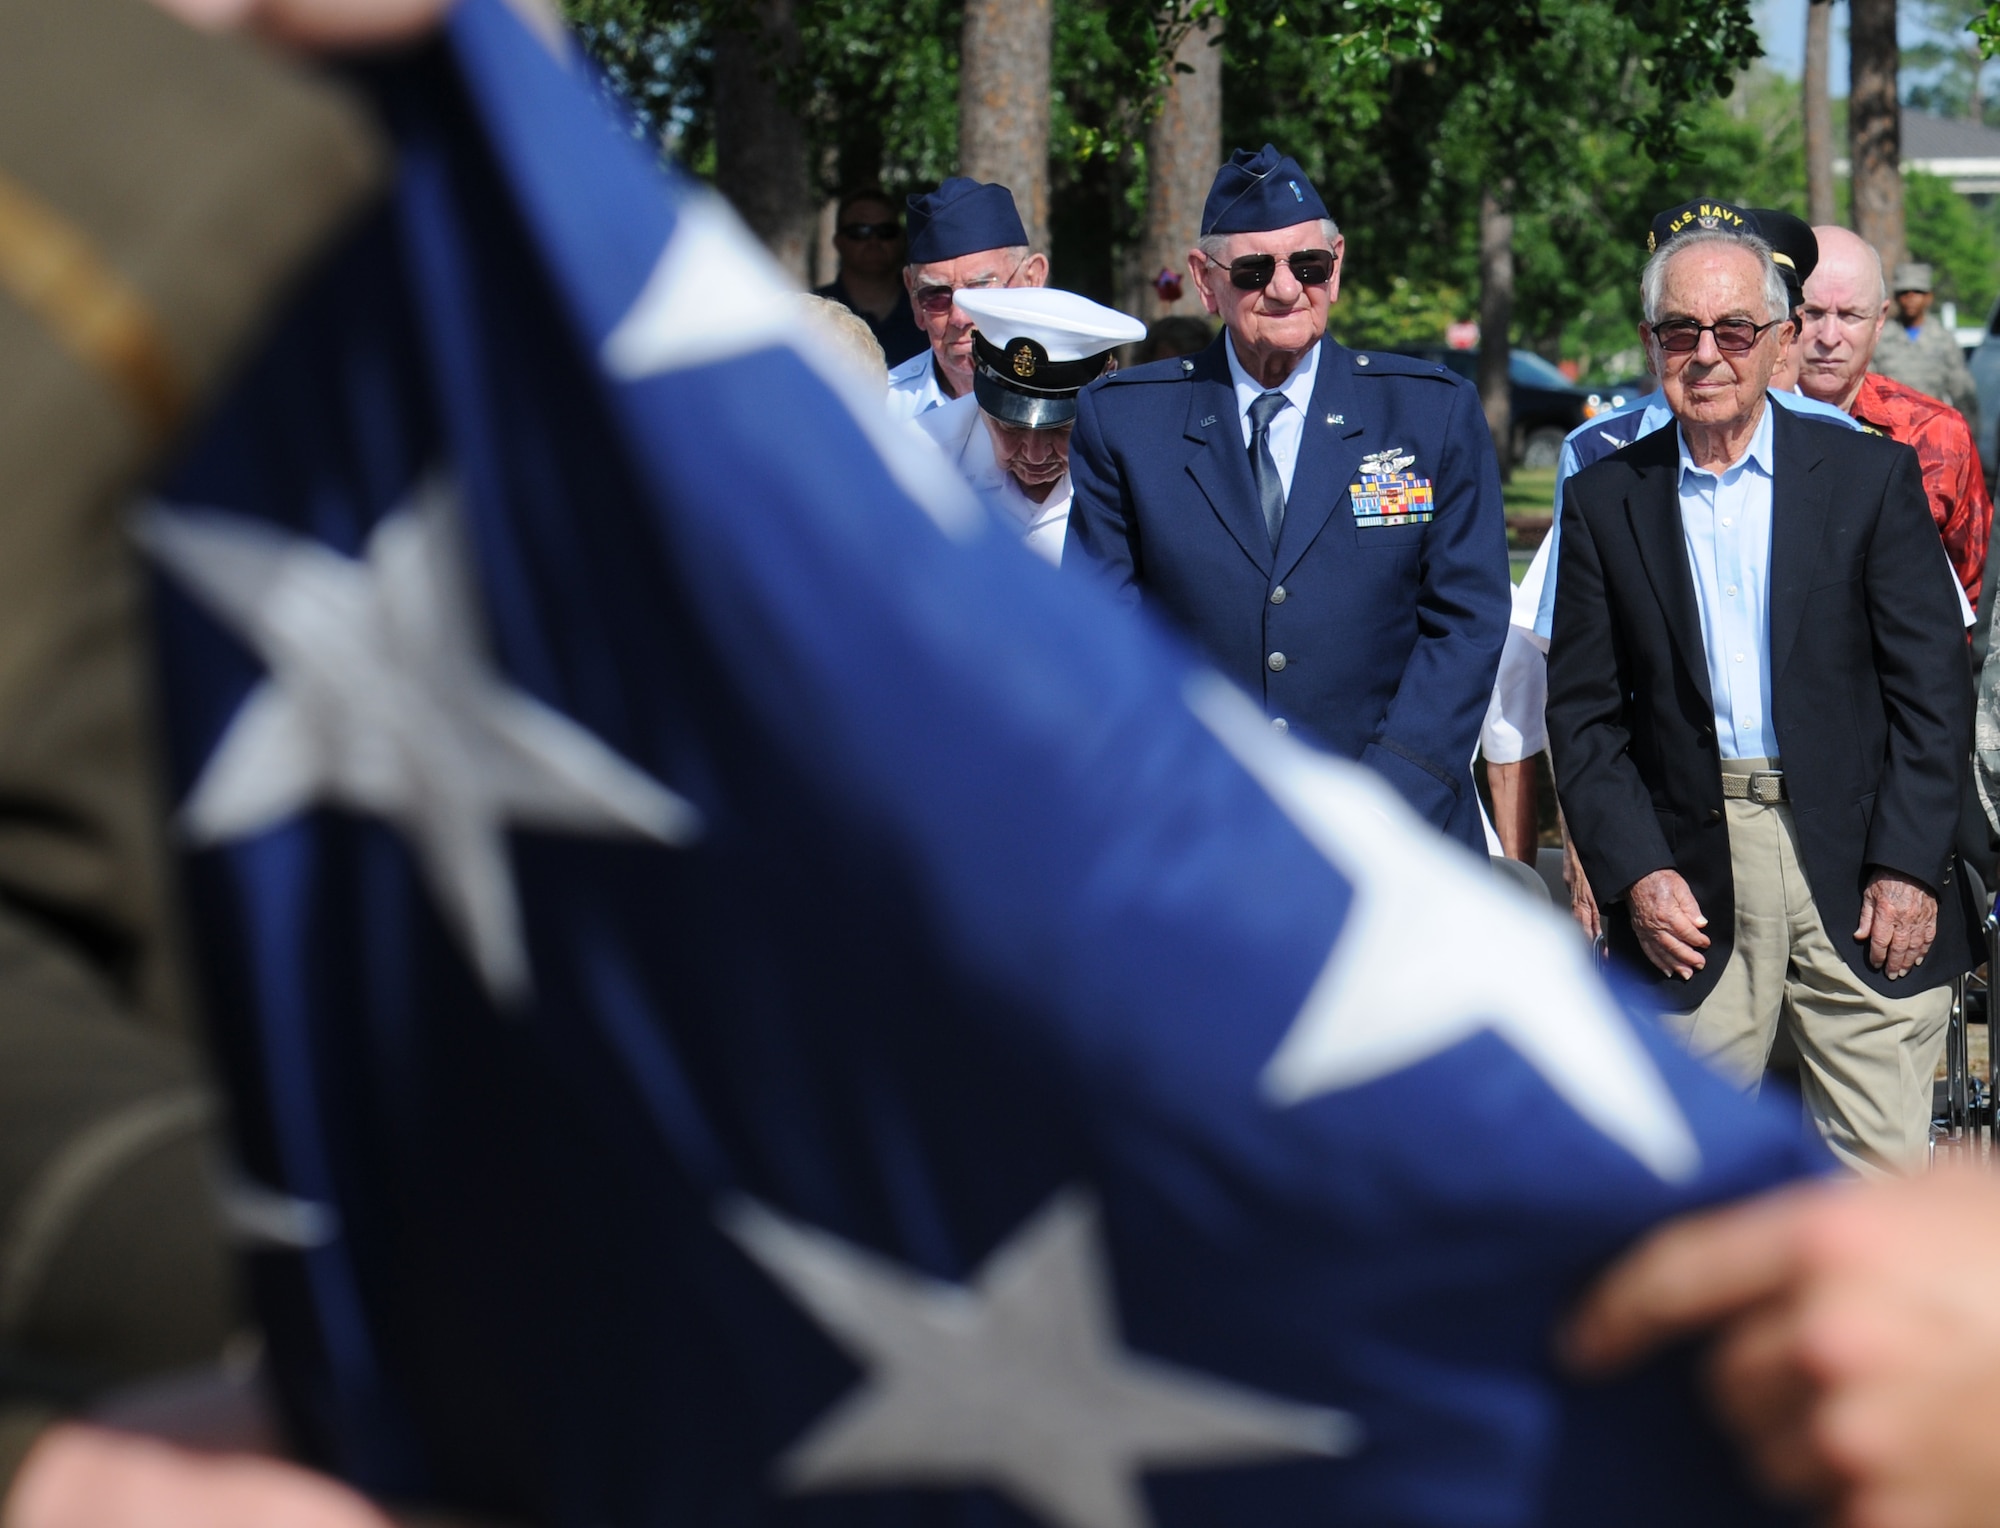 Chief Warrant Officer Thomas Adams, Jr., and Lt. Col. Henry Burkle, both retired and stationed at Keesler during WORLD WAR II, watch as members of the 81st Security Forces Squadron fold the U.S. flag during the Lt. Samuel Reeves Keesler, Jr. Memorial Retreat Ceremony May 13, 2016, Keesler Air Force Base, Miss. The event was held in honor of Lt. Keesler’s date of entry into the Army Air Service 99 years ago. The retreat ceremony is part of a year-long celebration of Lt. Keesler, a Mississippi native and WORLD WAR I hero, and the 75th anniversary of the opening of the base. (U.S. Air Force photo by Kemberly Groue)